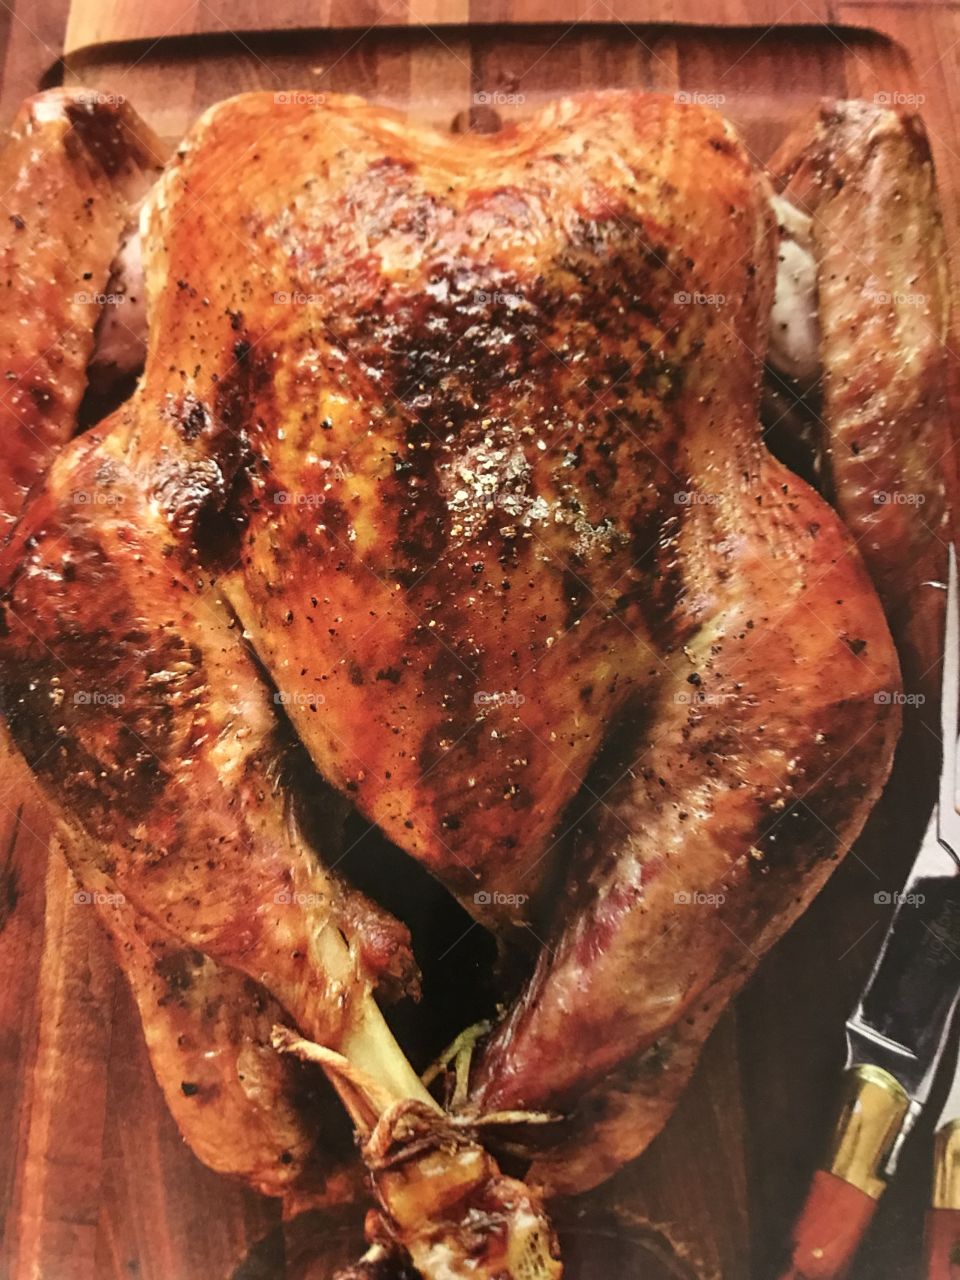 Perfectly roasted Turkey. Perfectly rubbed with fresh herbs and temperature is on point. 